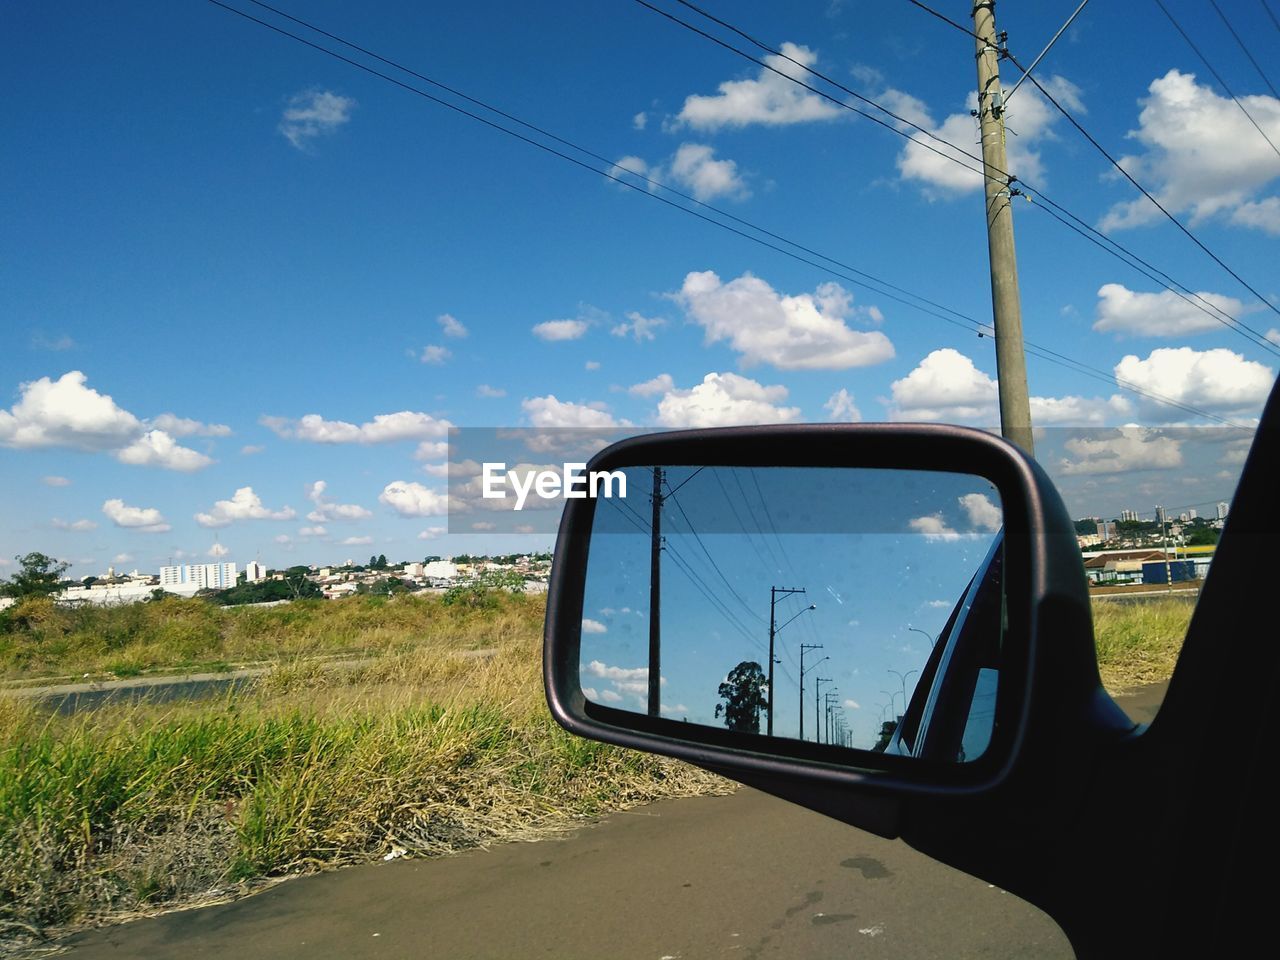 REFLECTION ON SIDE-VIEW MIRROR OF CAR